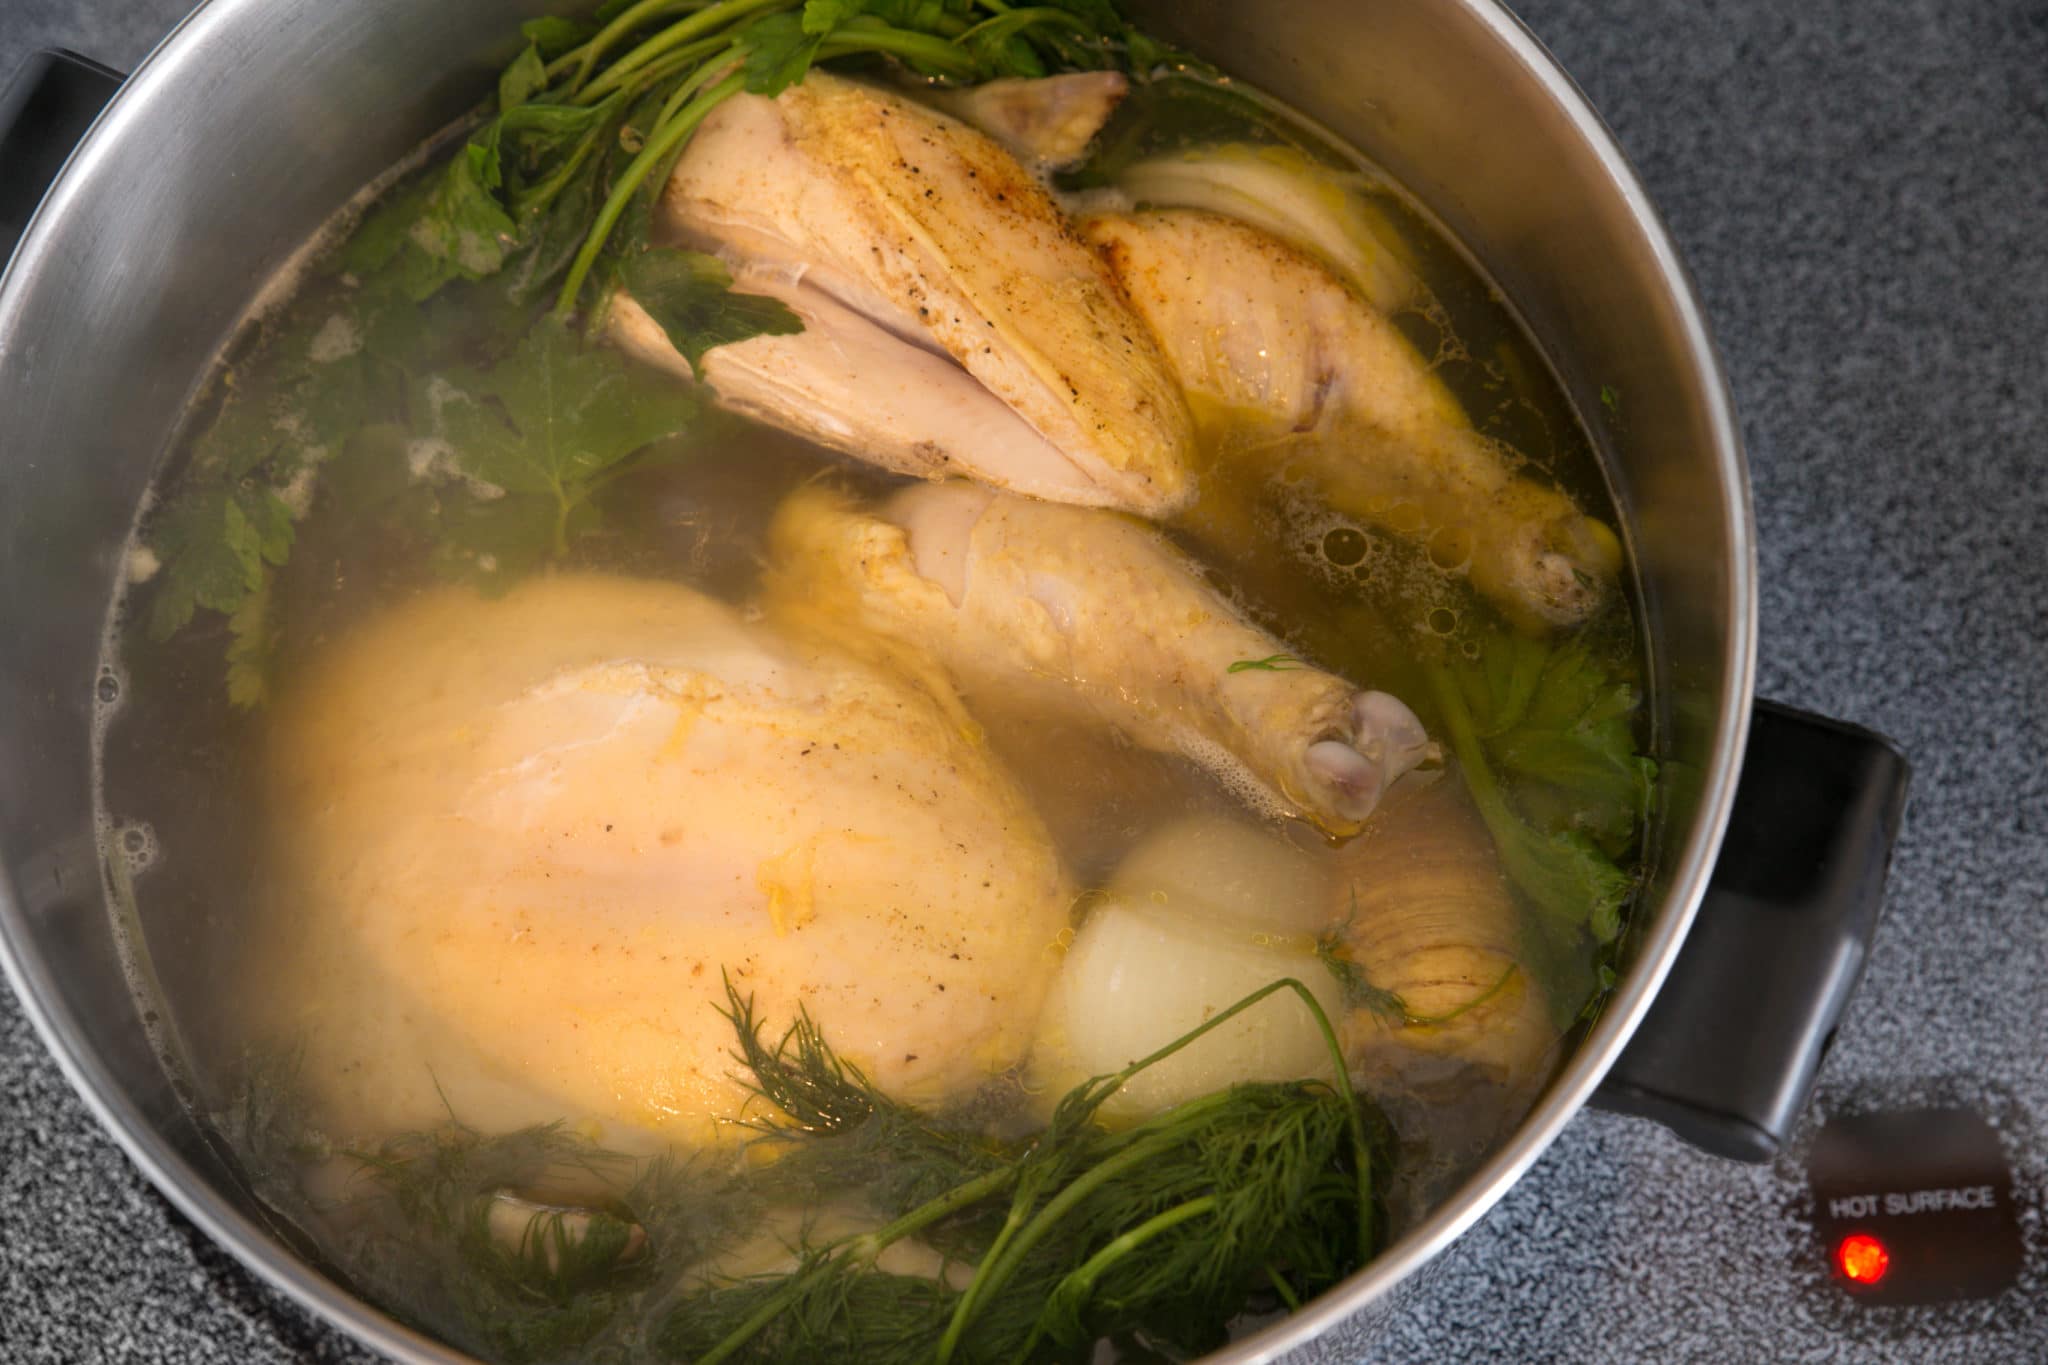 Chicken in boiling pot of water with herbs